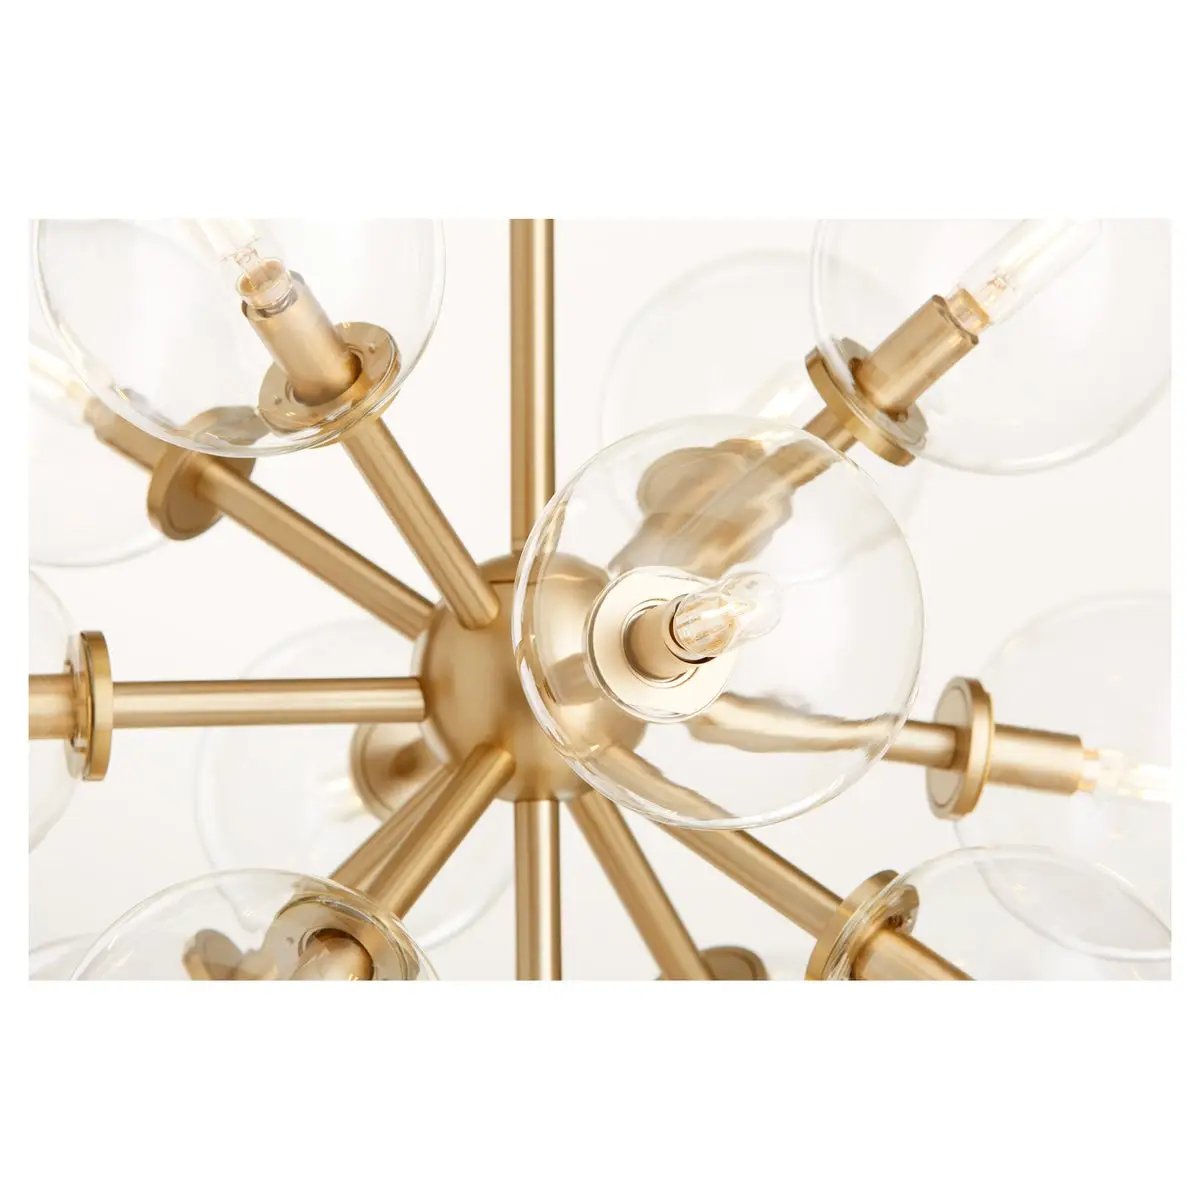 Sputnik chandelier with clear glass domes and aged brass frames, adding mid-century modern appeal. 13 bulbs, 60W, dimmable. UL Listed. 26"W x 22"H.